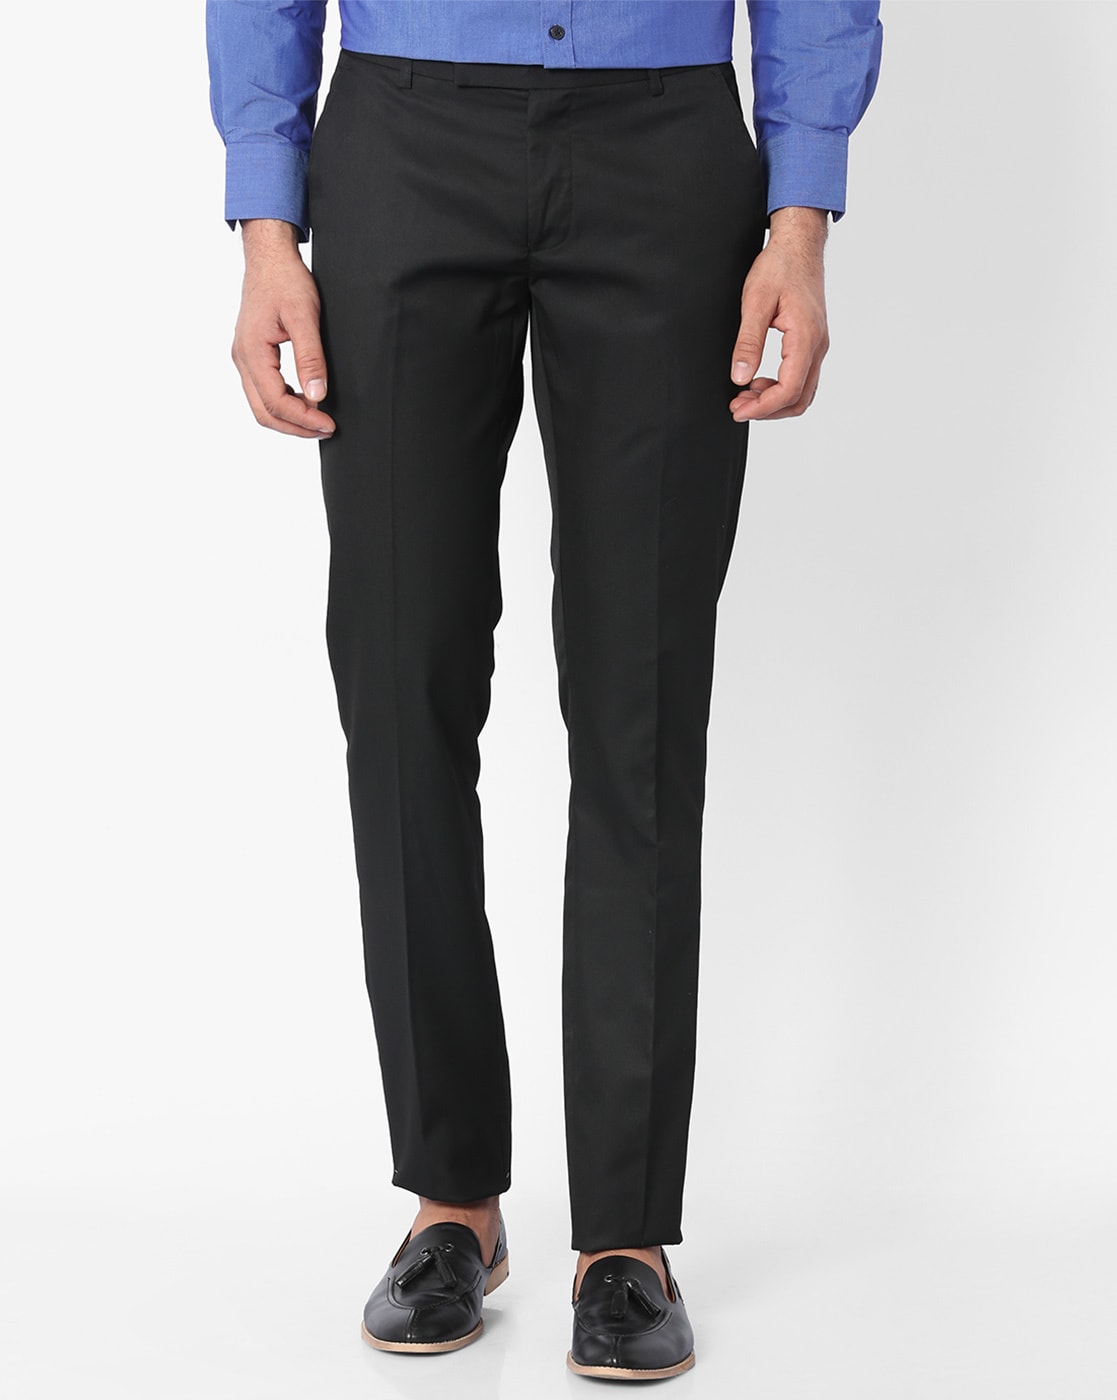 Buy Turquoise Trousers & Pants for Men by Kabaat Online | Ajio.com